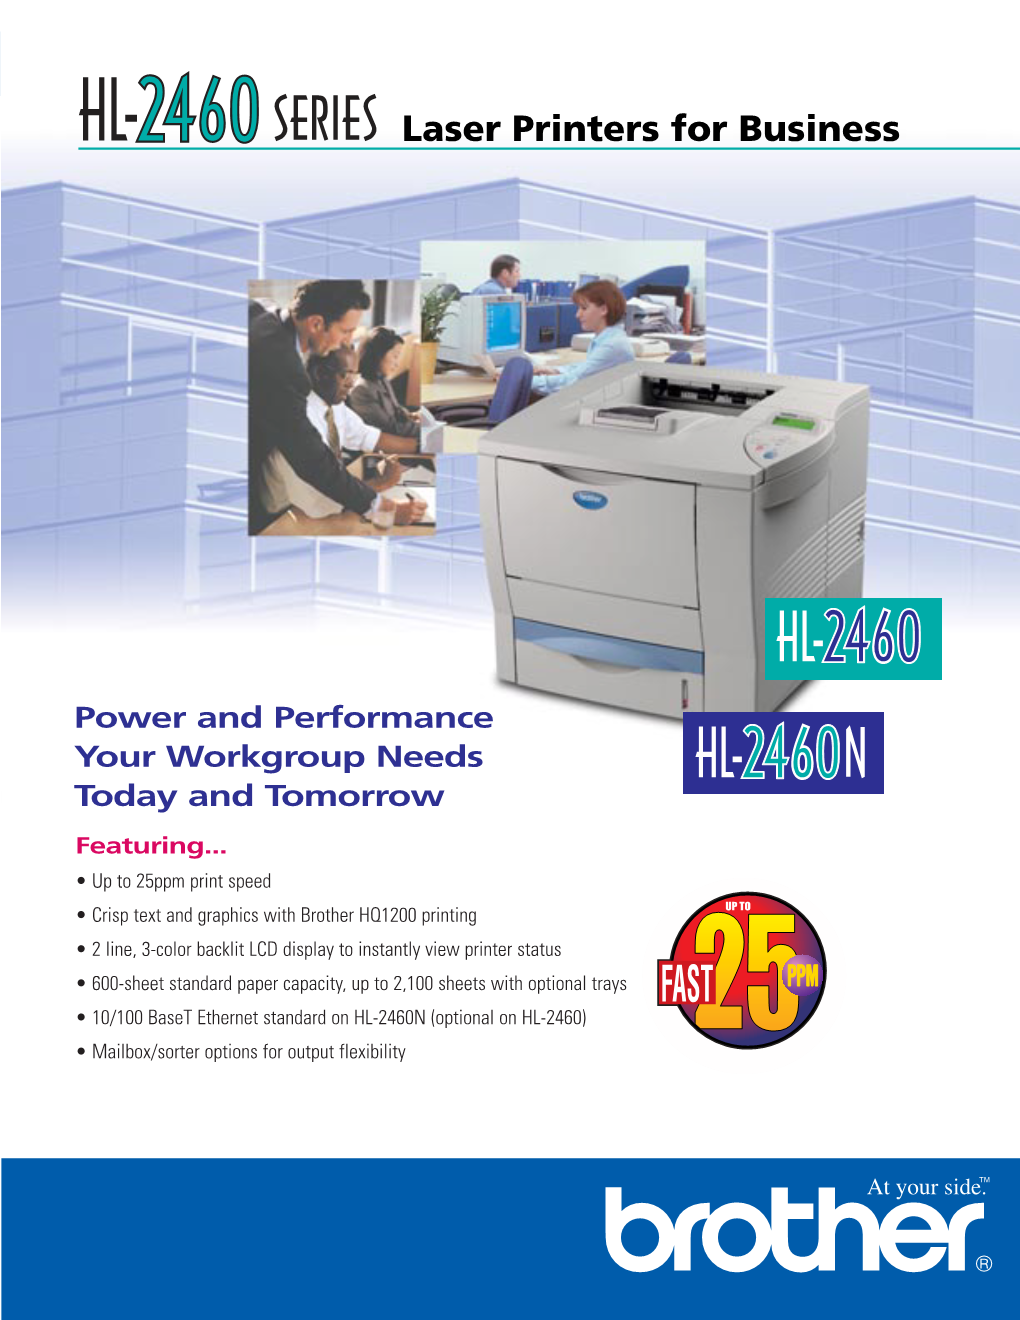 Power and Performance Your Workgroup Needs Today and Tomorrow Featuring